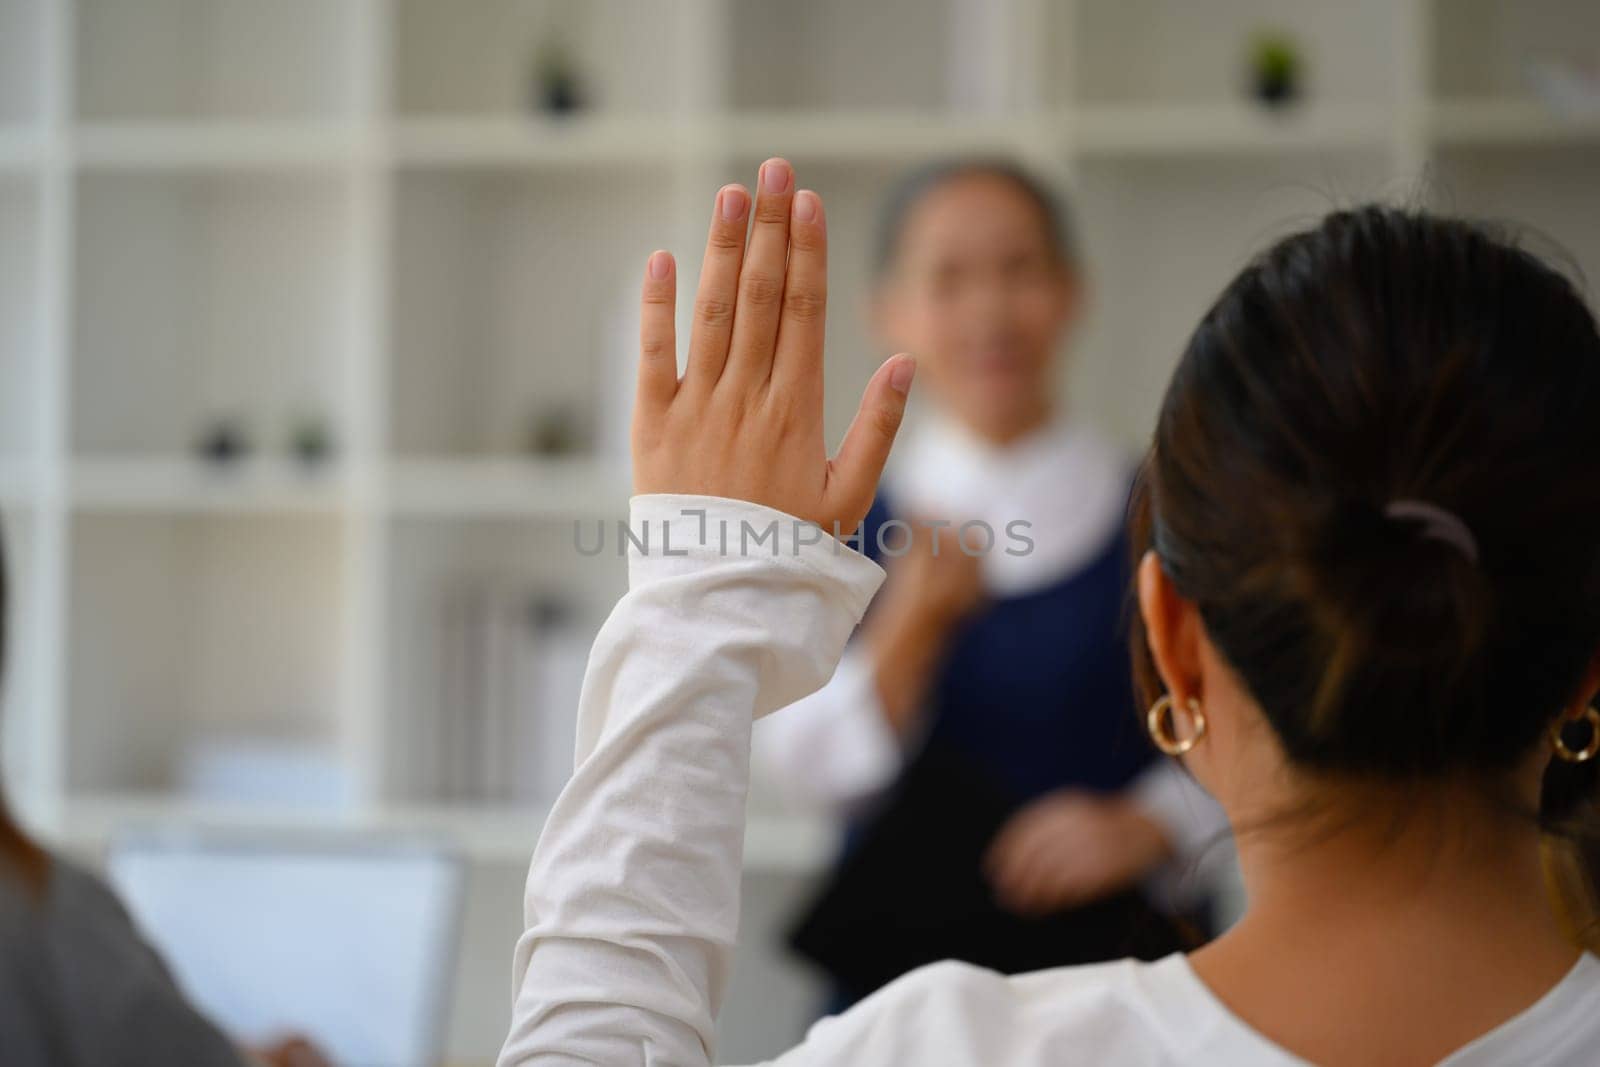 Back view of female college student raising hand to answering a question during lecture by prathanchorruangsak